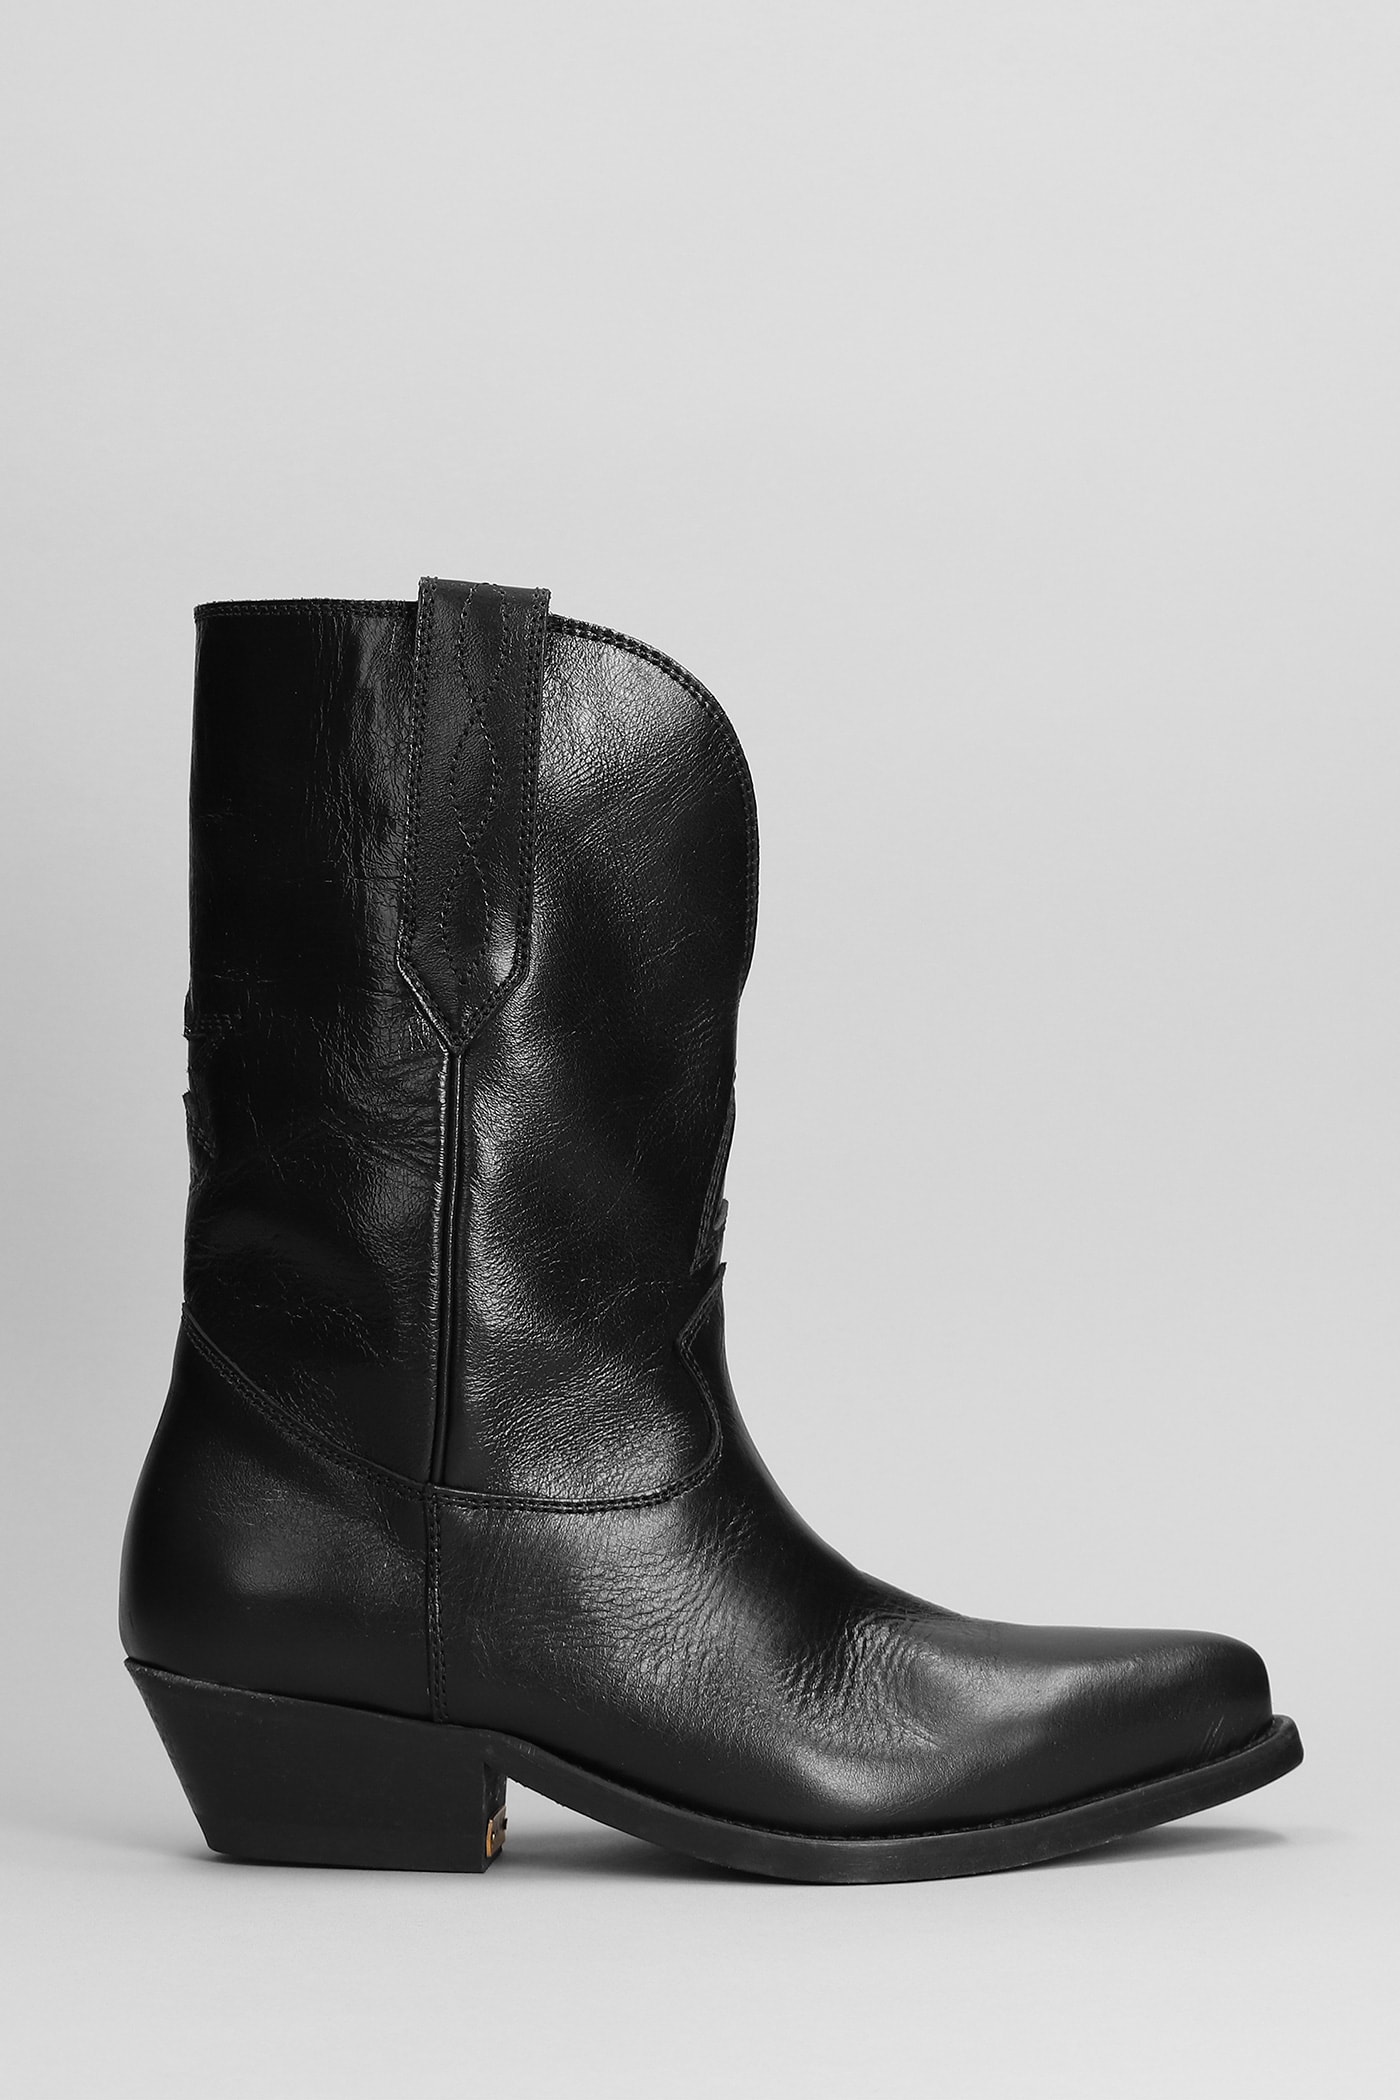 Wish Star Texan Boots In Black Leather